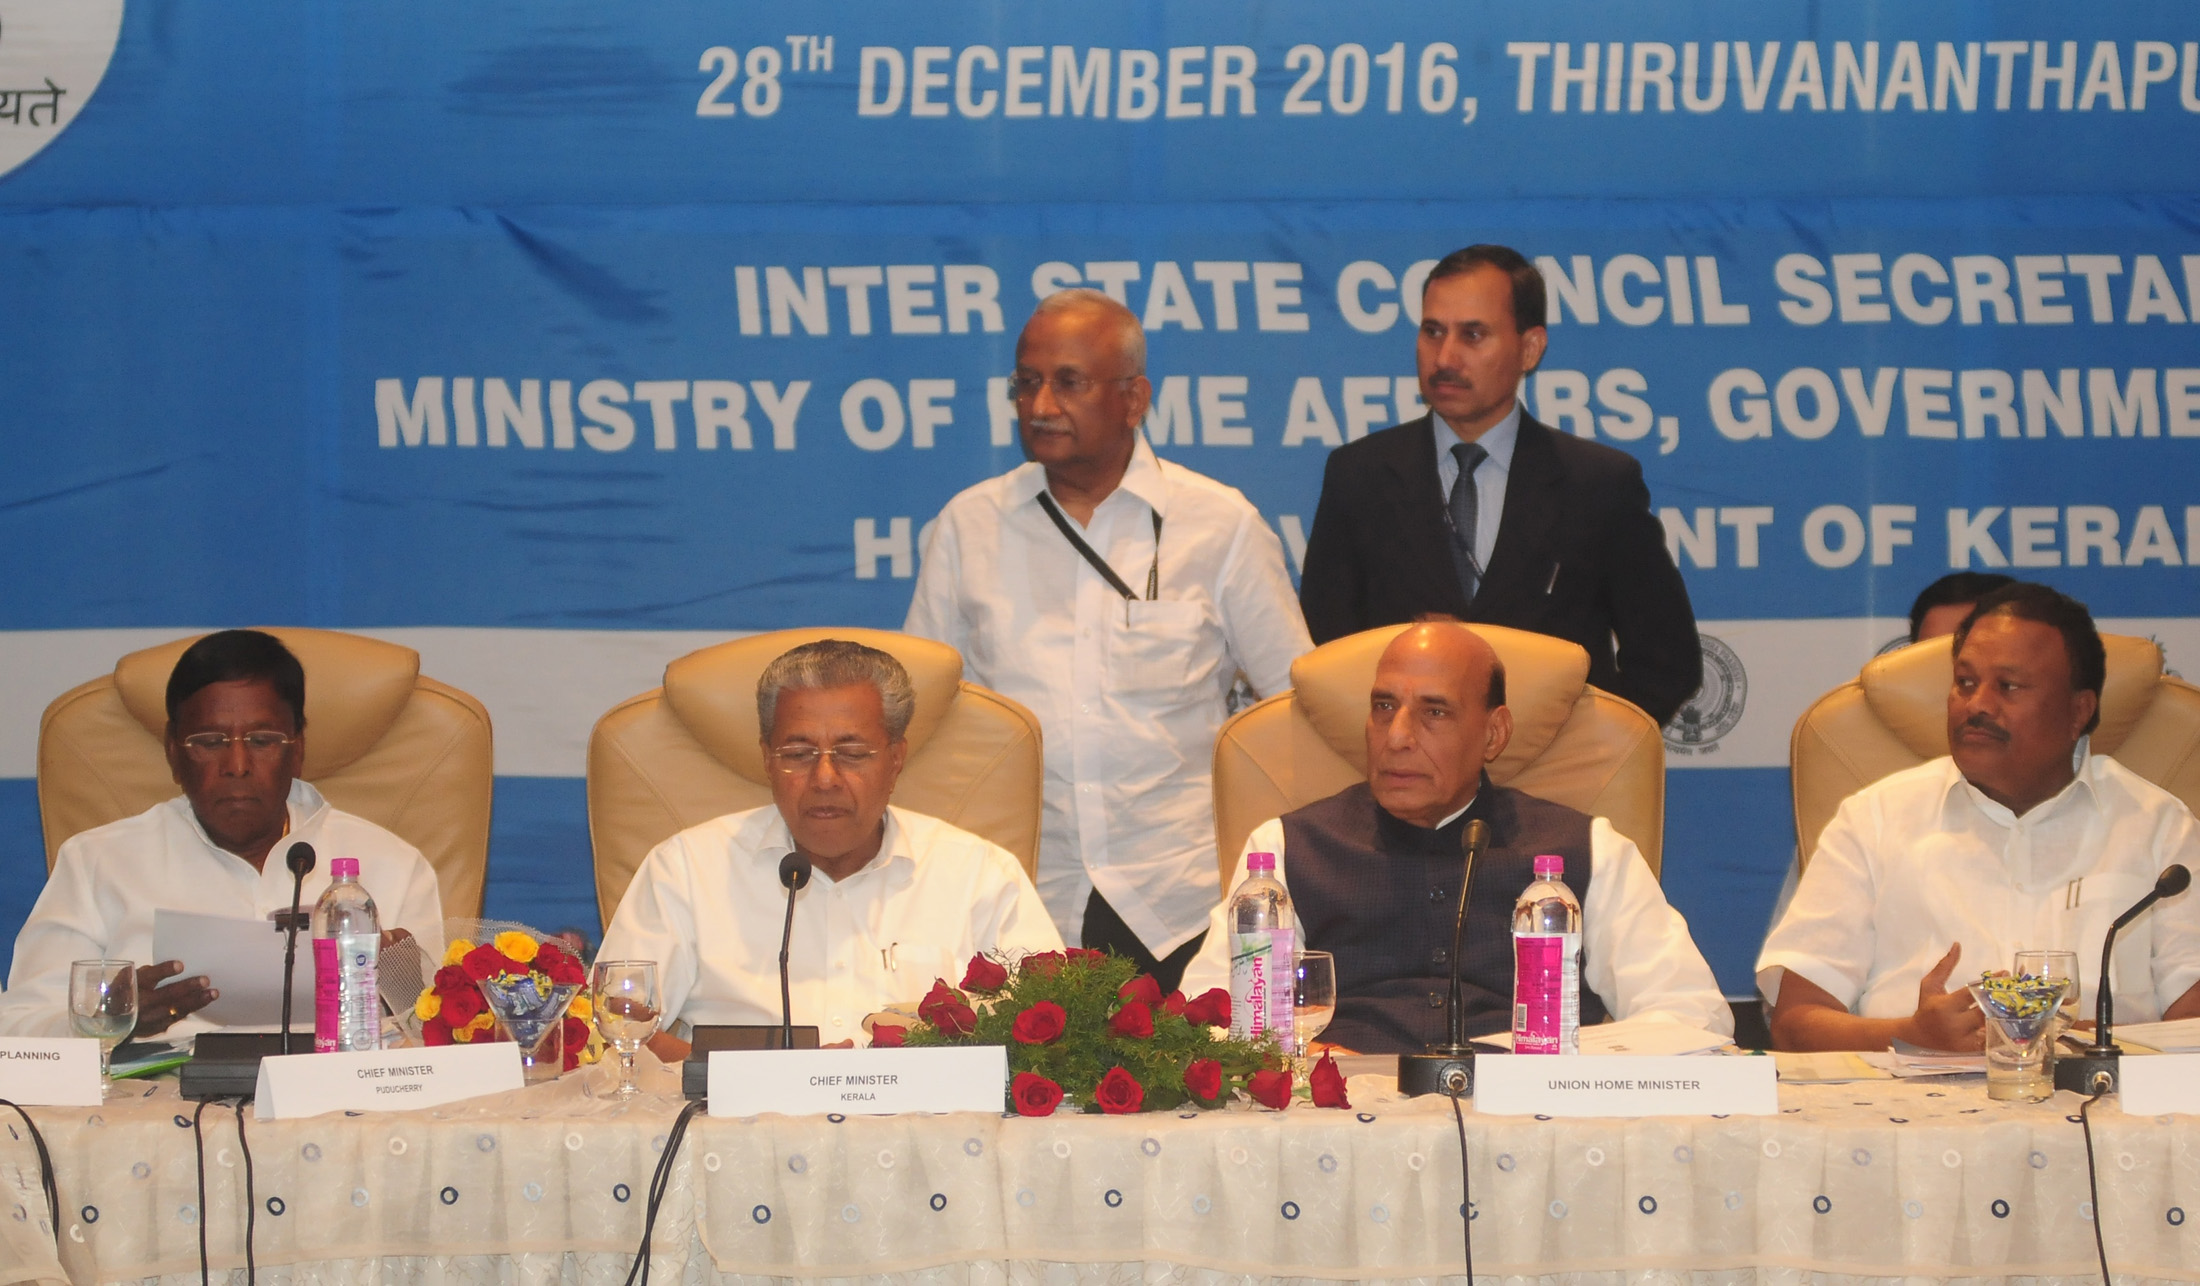 The Union Home Minister, Shri Rajnath Singh chairing the 27th Southern Zonal Council meeting, in Thiruvananthapuram on December 28, 2016. The Chief Minister of Kerala, Shri Pinarayi Vijayan and the Chief Minister of Puducherry, Shri V. Narayanasamy are also seen.